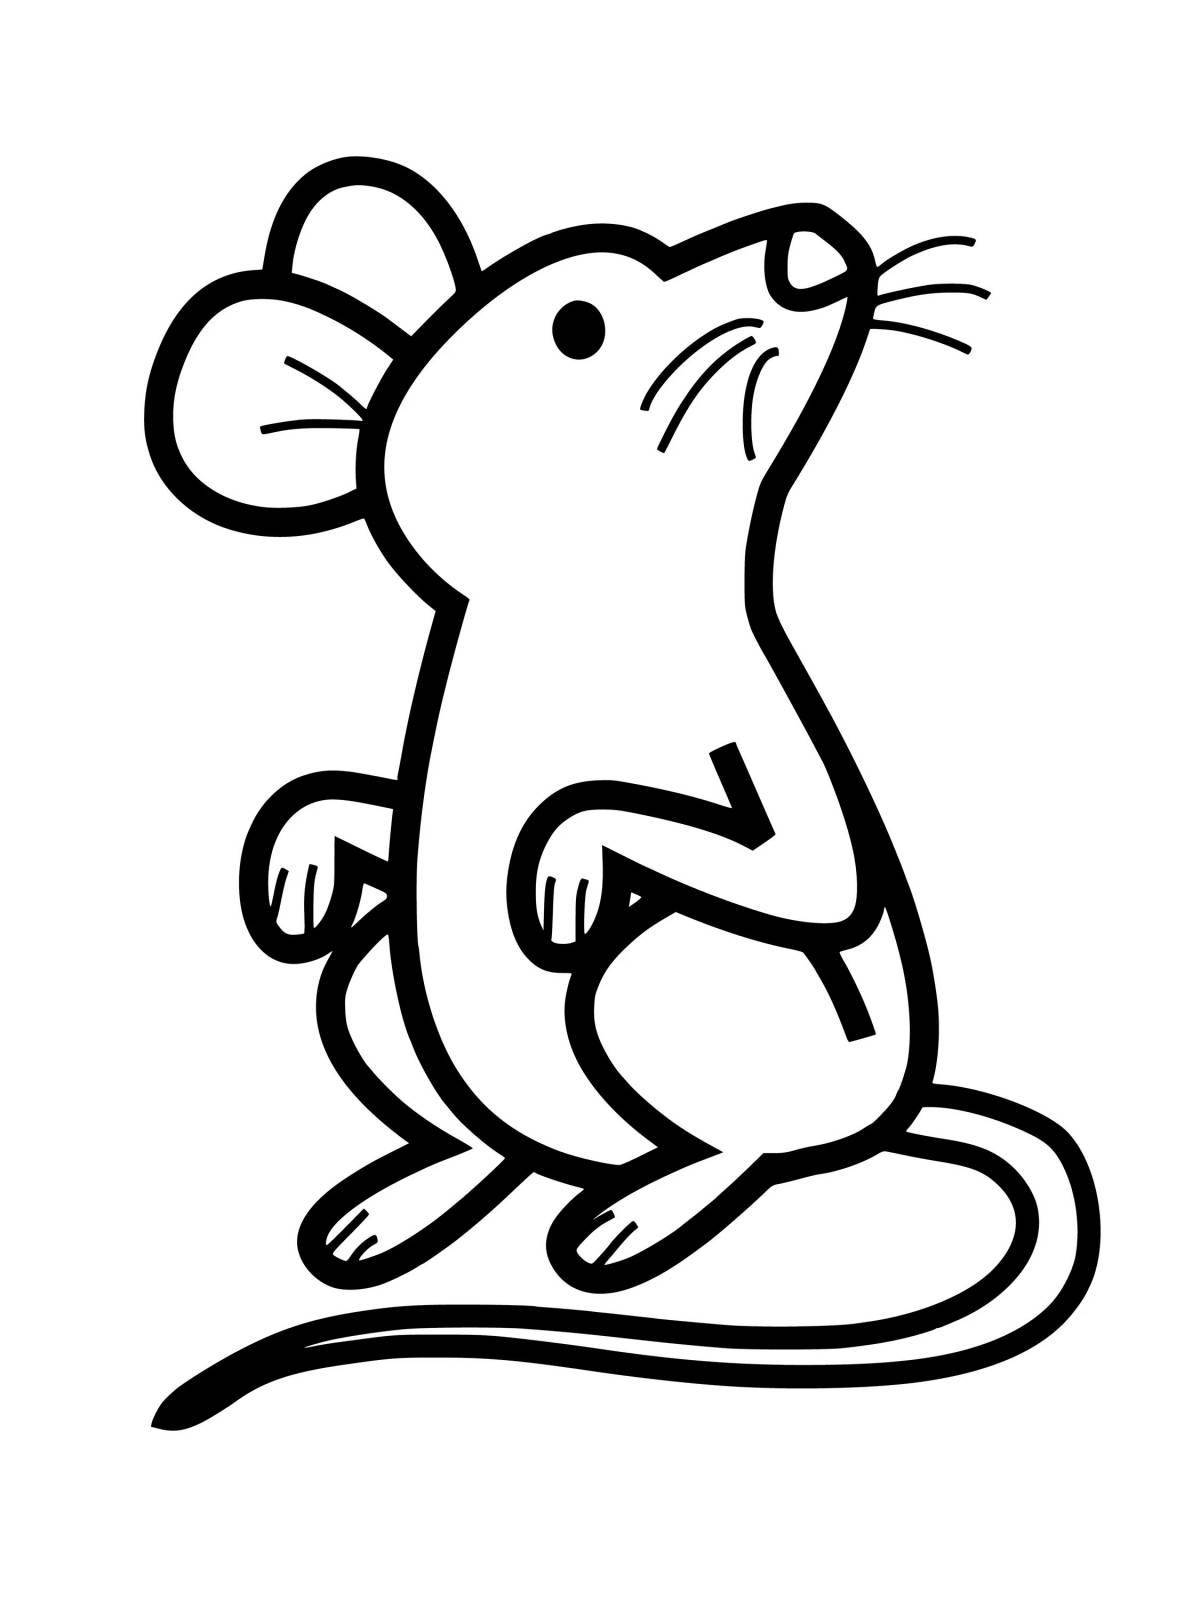 Coloring mouse for children